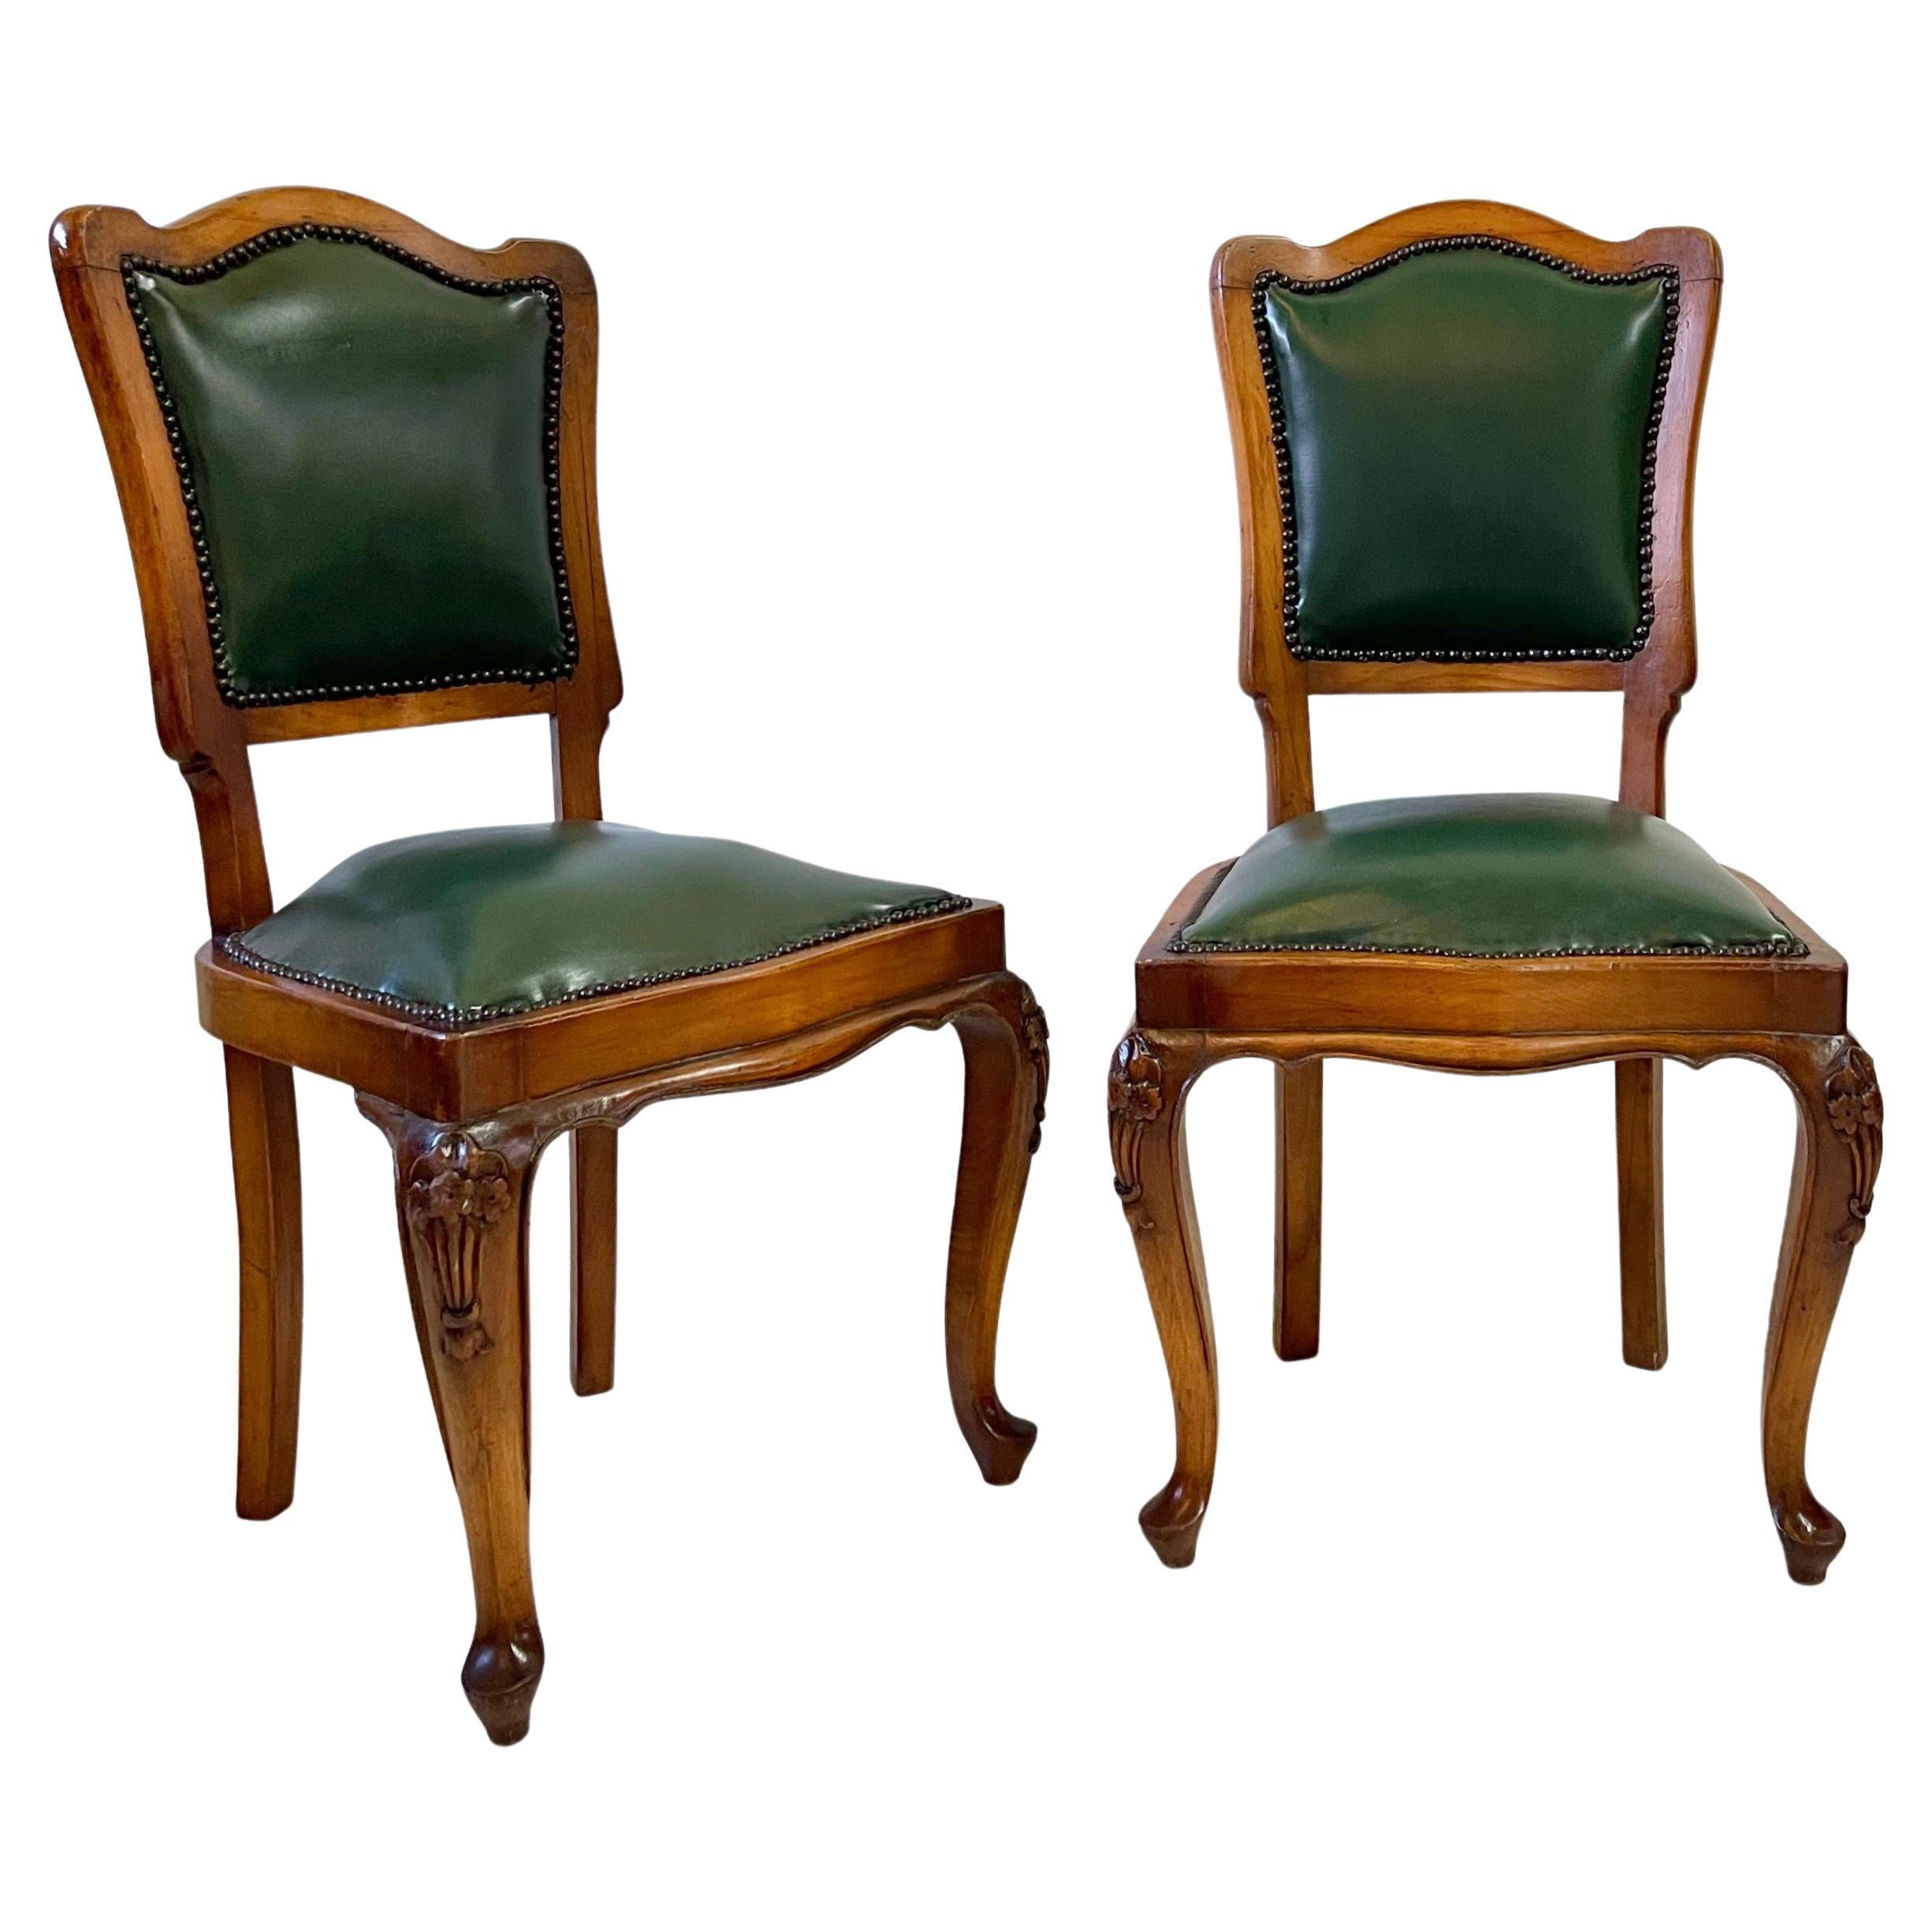 Pair of 19th Century Louis XV Fruitwood Side Chairs